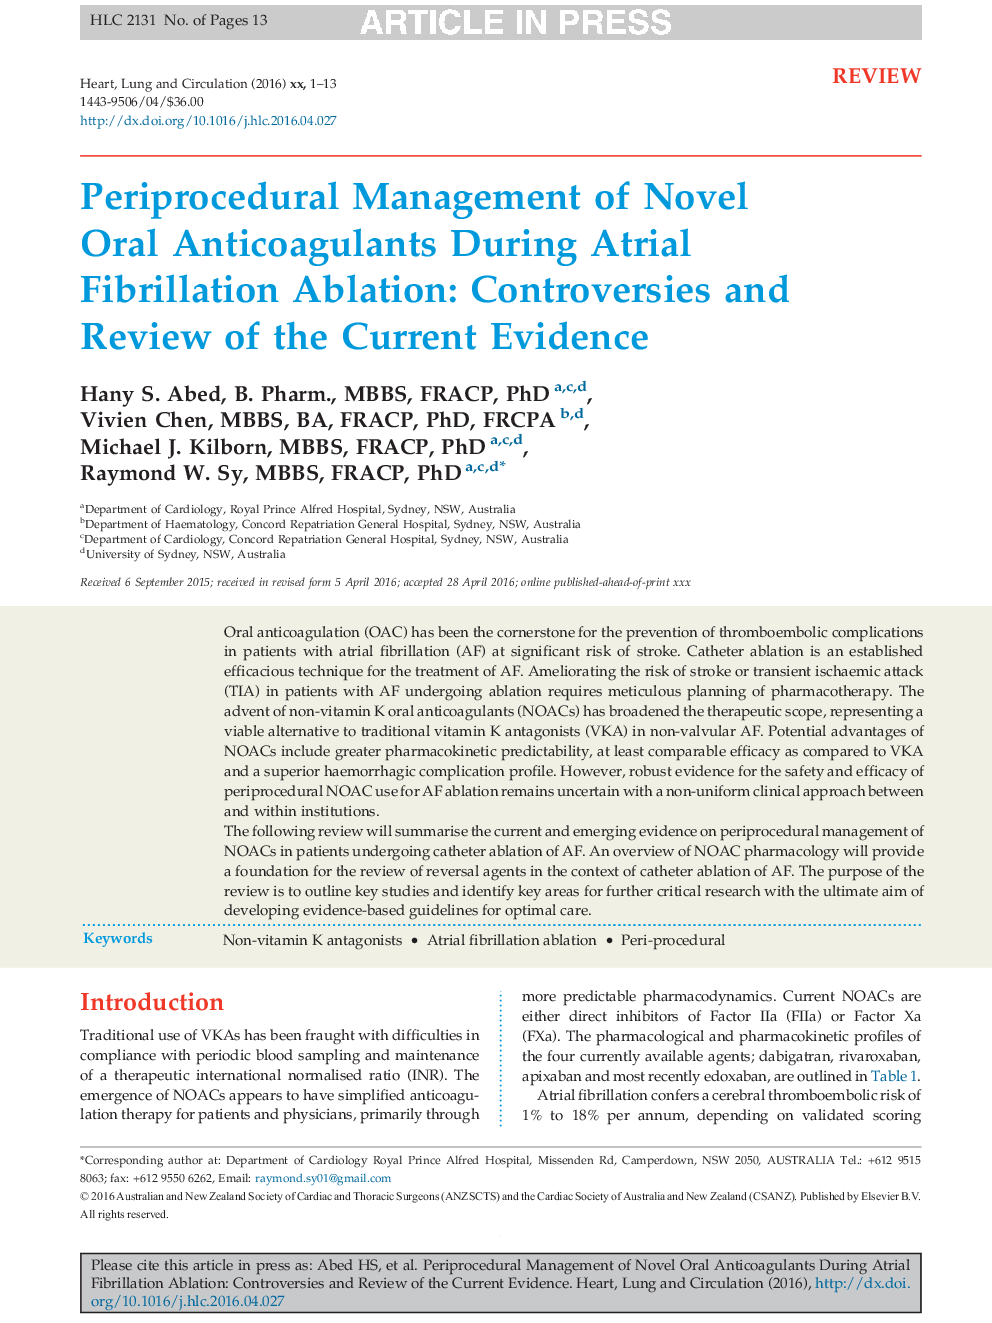 Periprocedural Management of Novel Oral Anticoagulants During Atrial Fibrillation Ablation: Controversies and Review of the Current Evidence